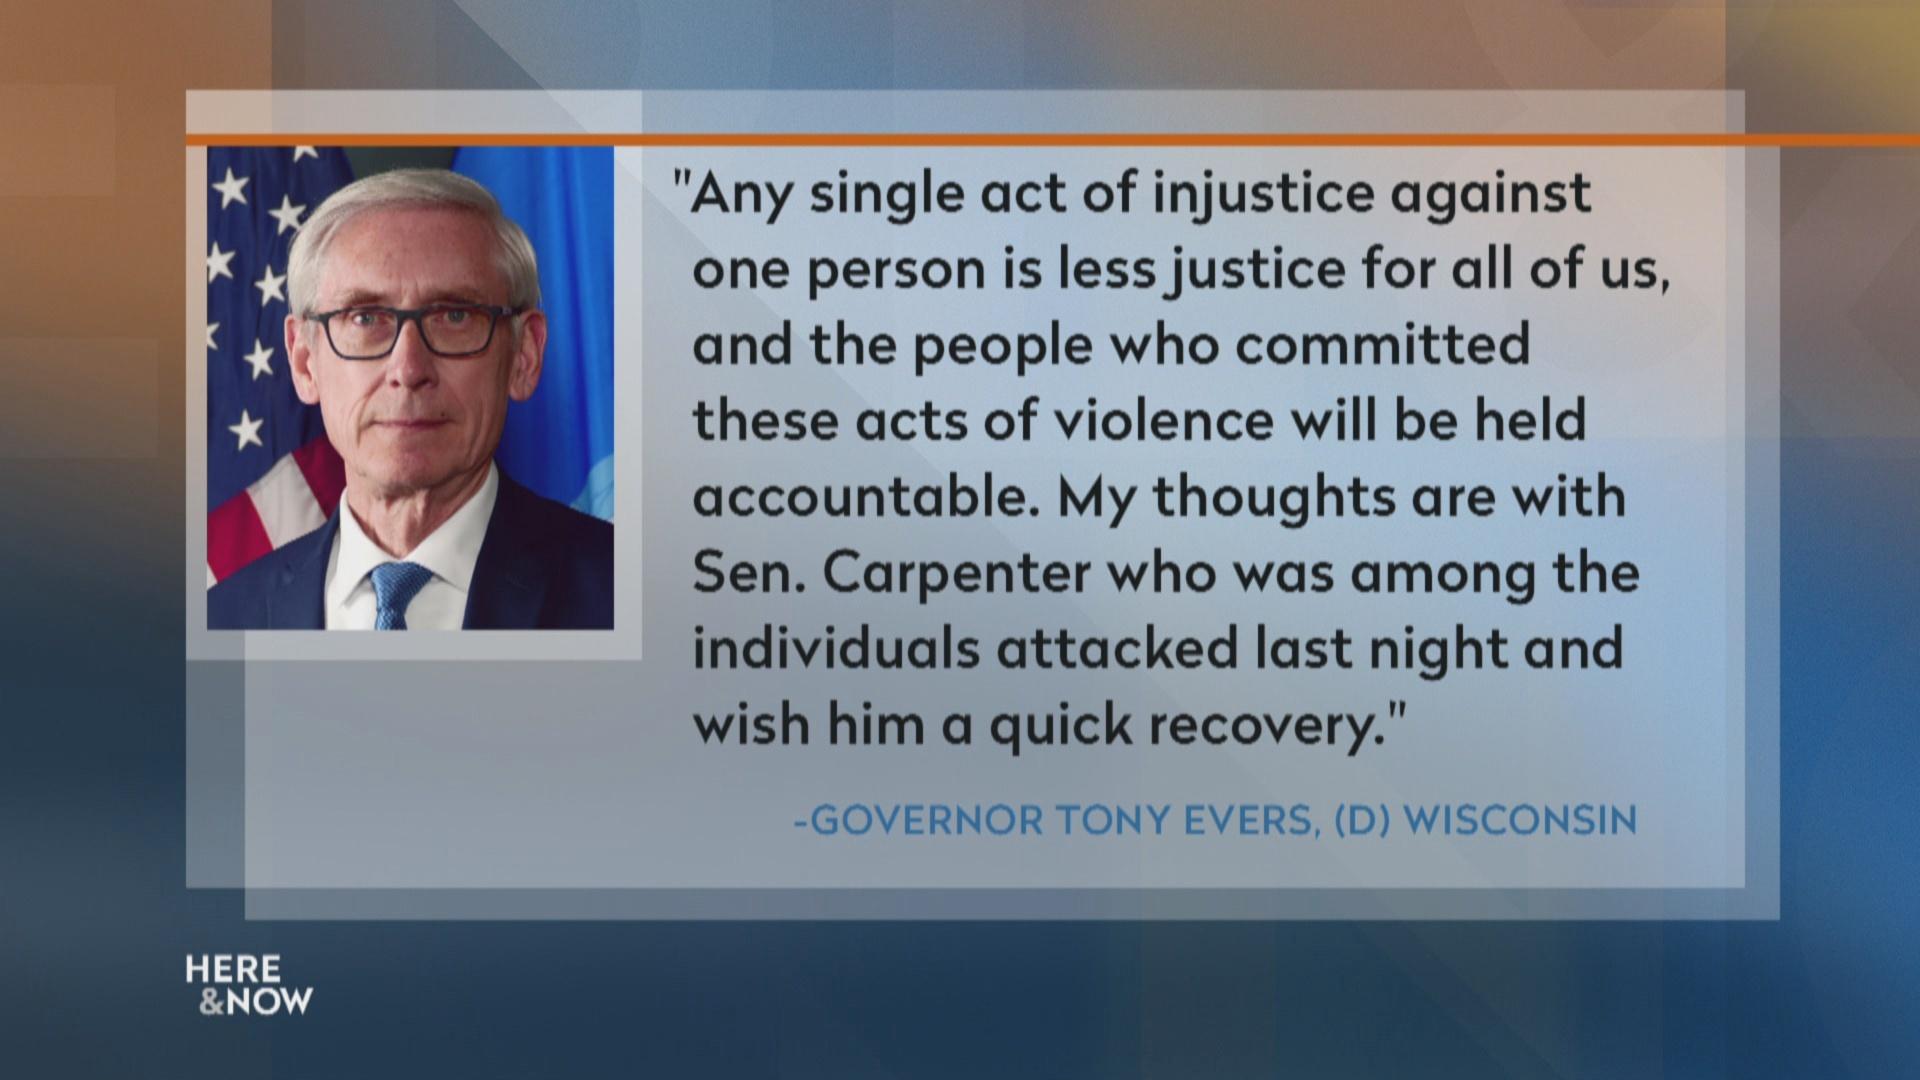 Gov. Evers Again Deploys National Guard to Protect Property